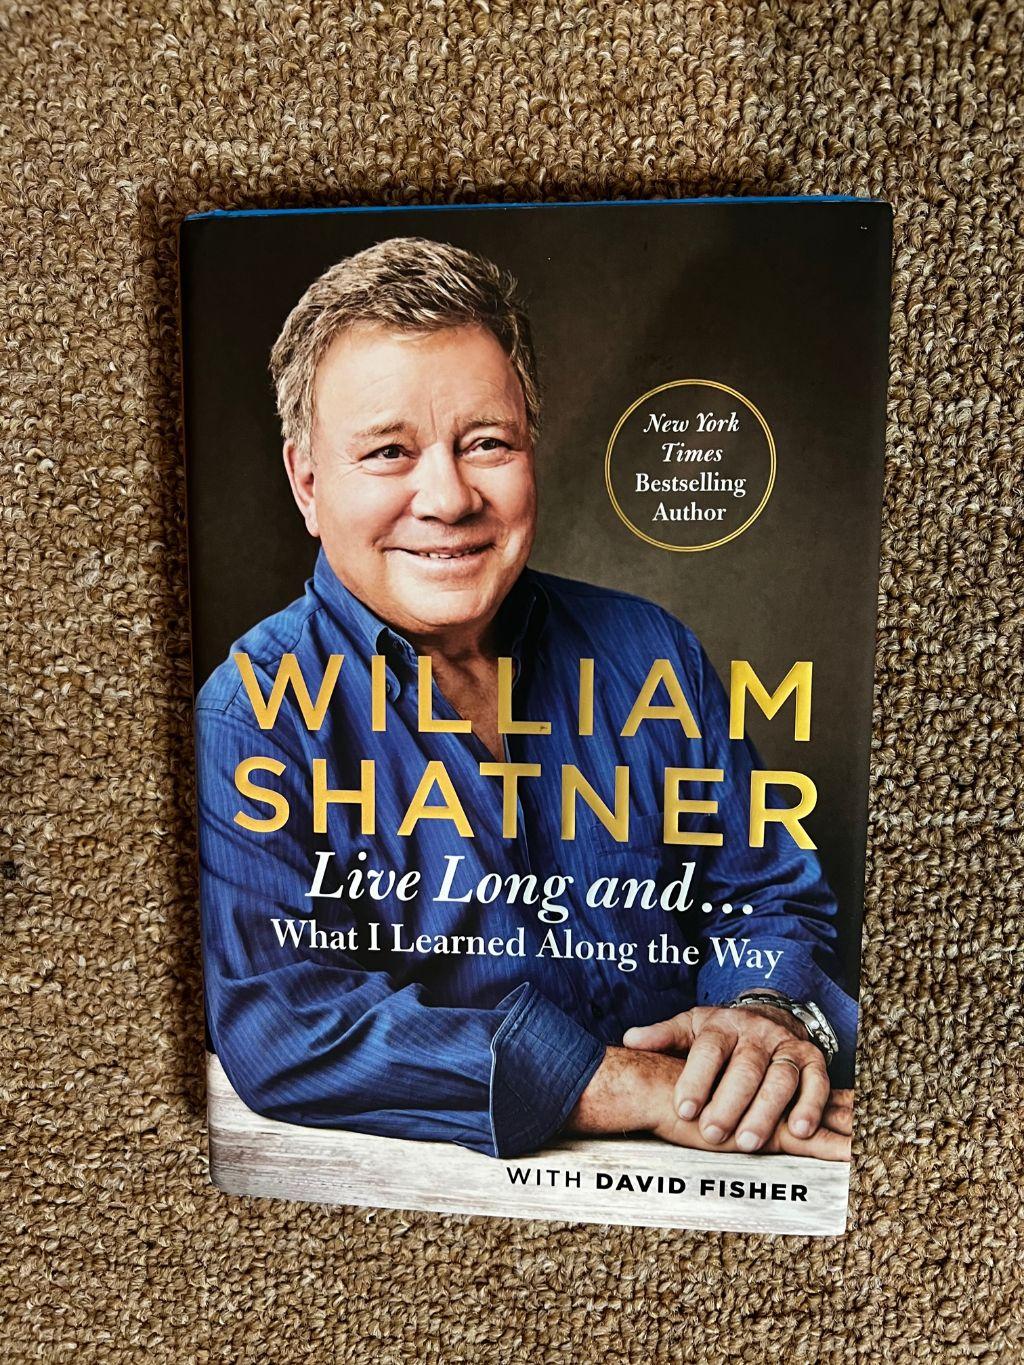 Live Long And...book - signed by Mr. Shatner